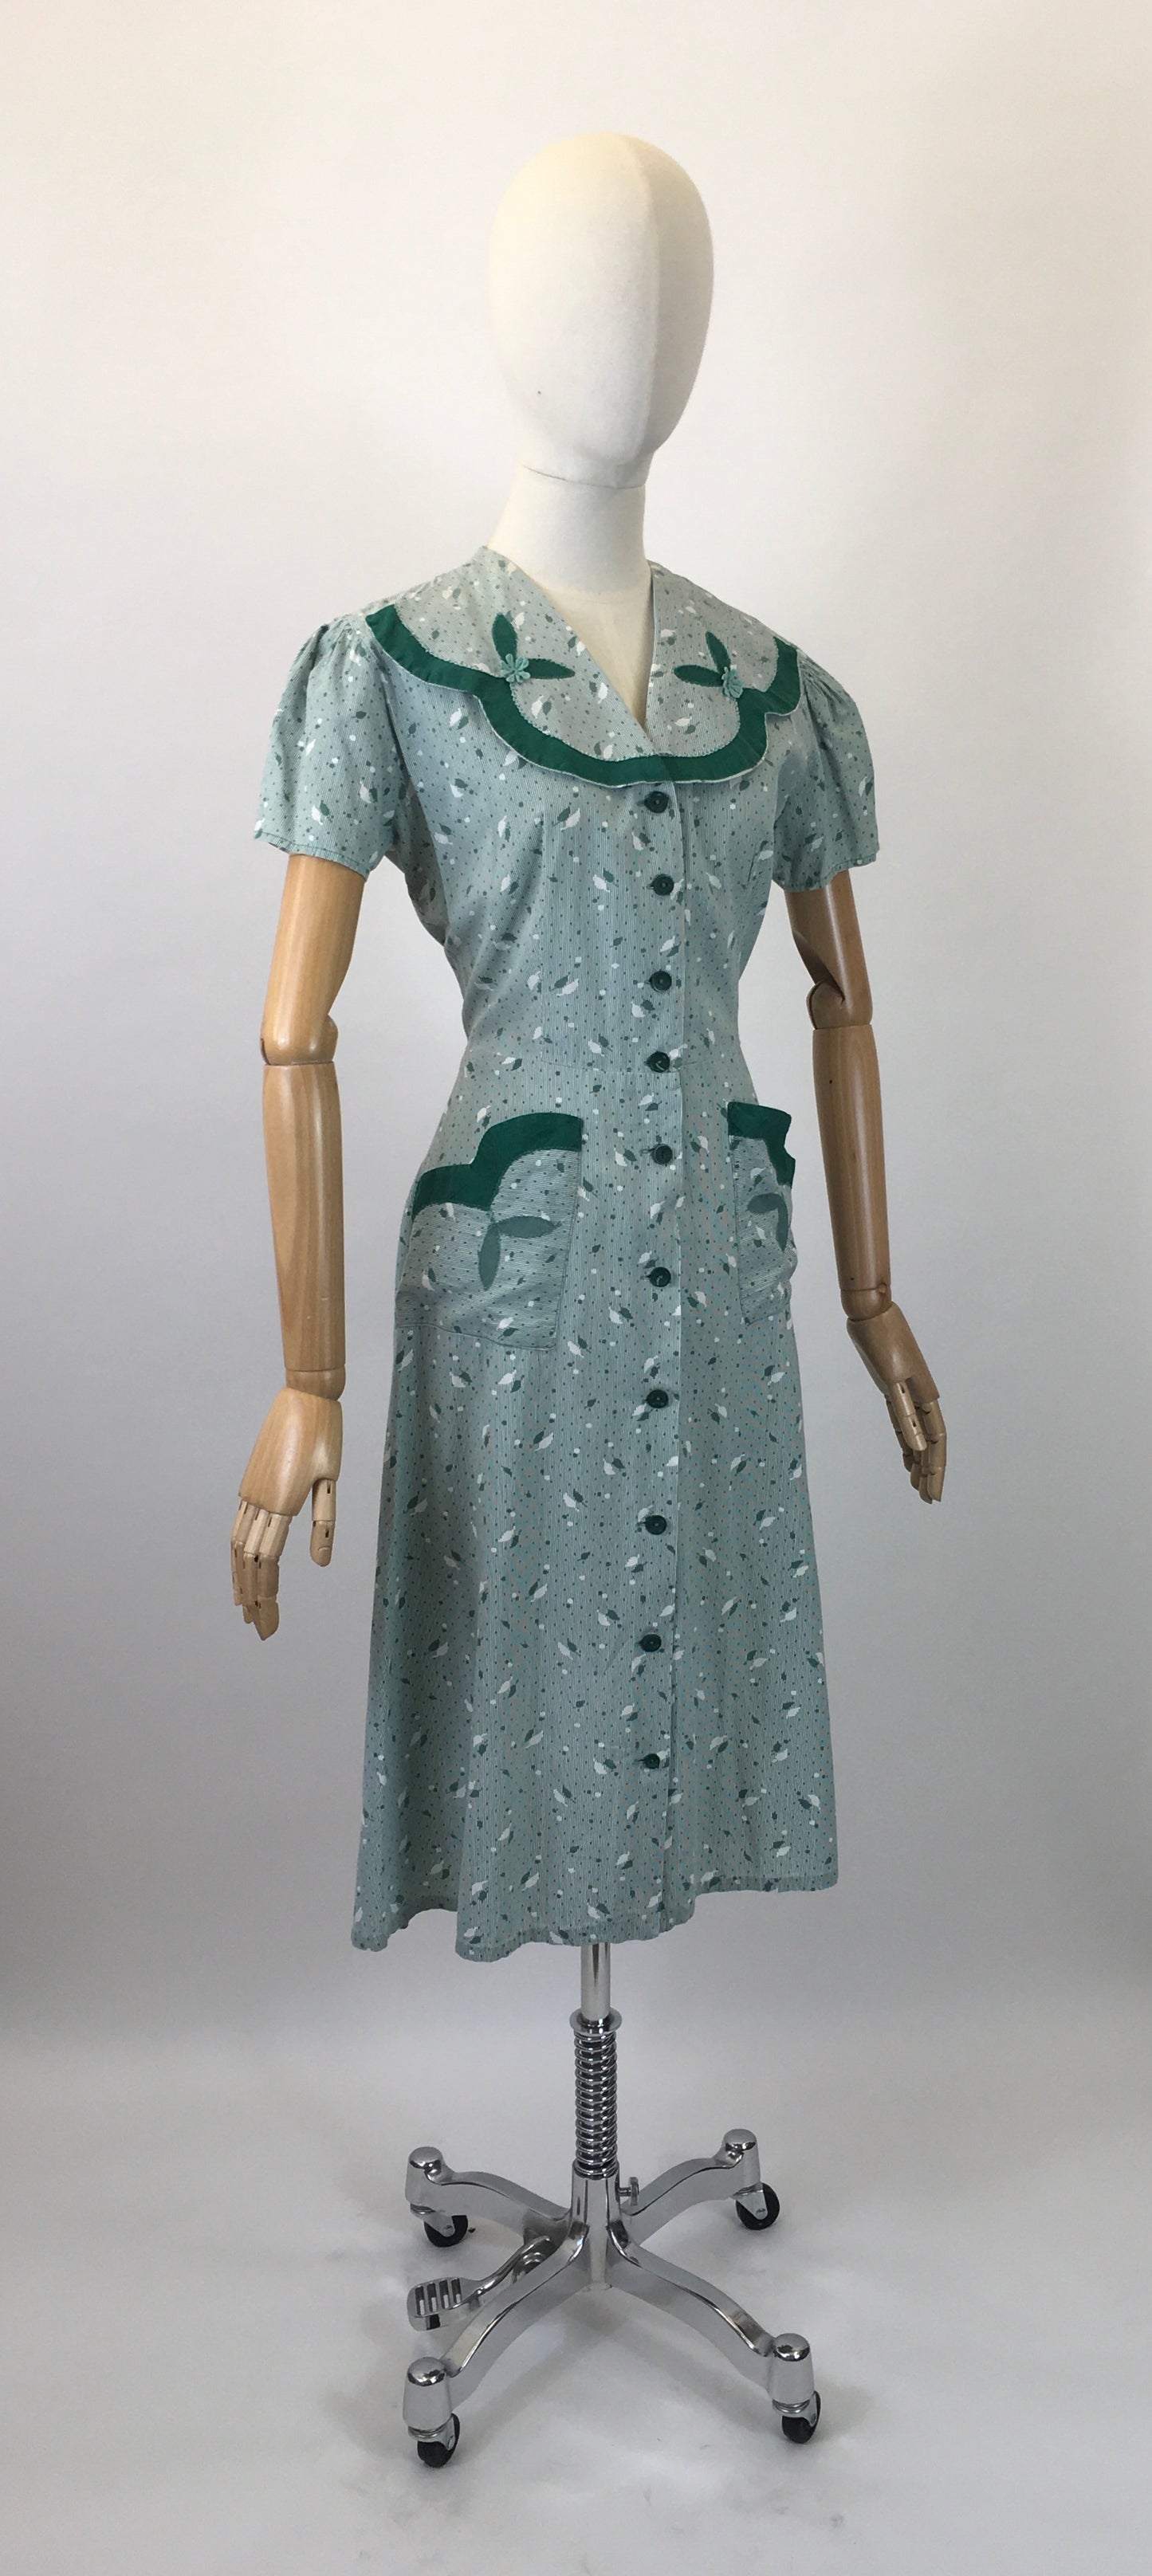 Original 1940’s Beautiful Cotton Day Dress - In A Leaf Print With Appliqué Details